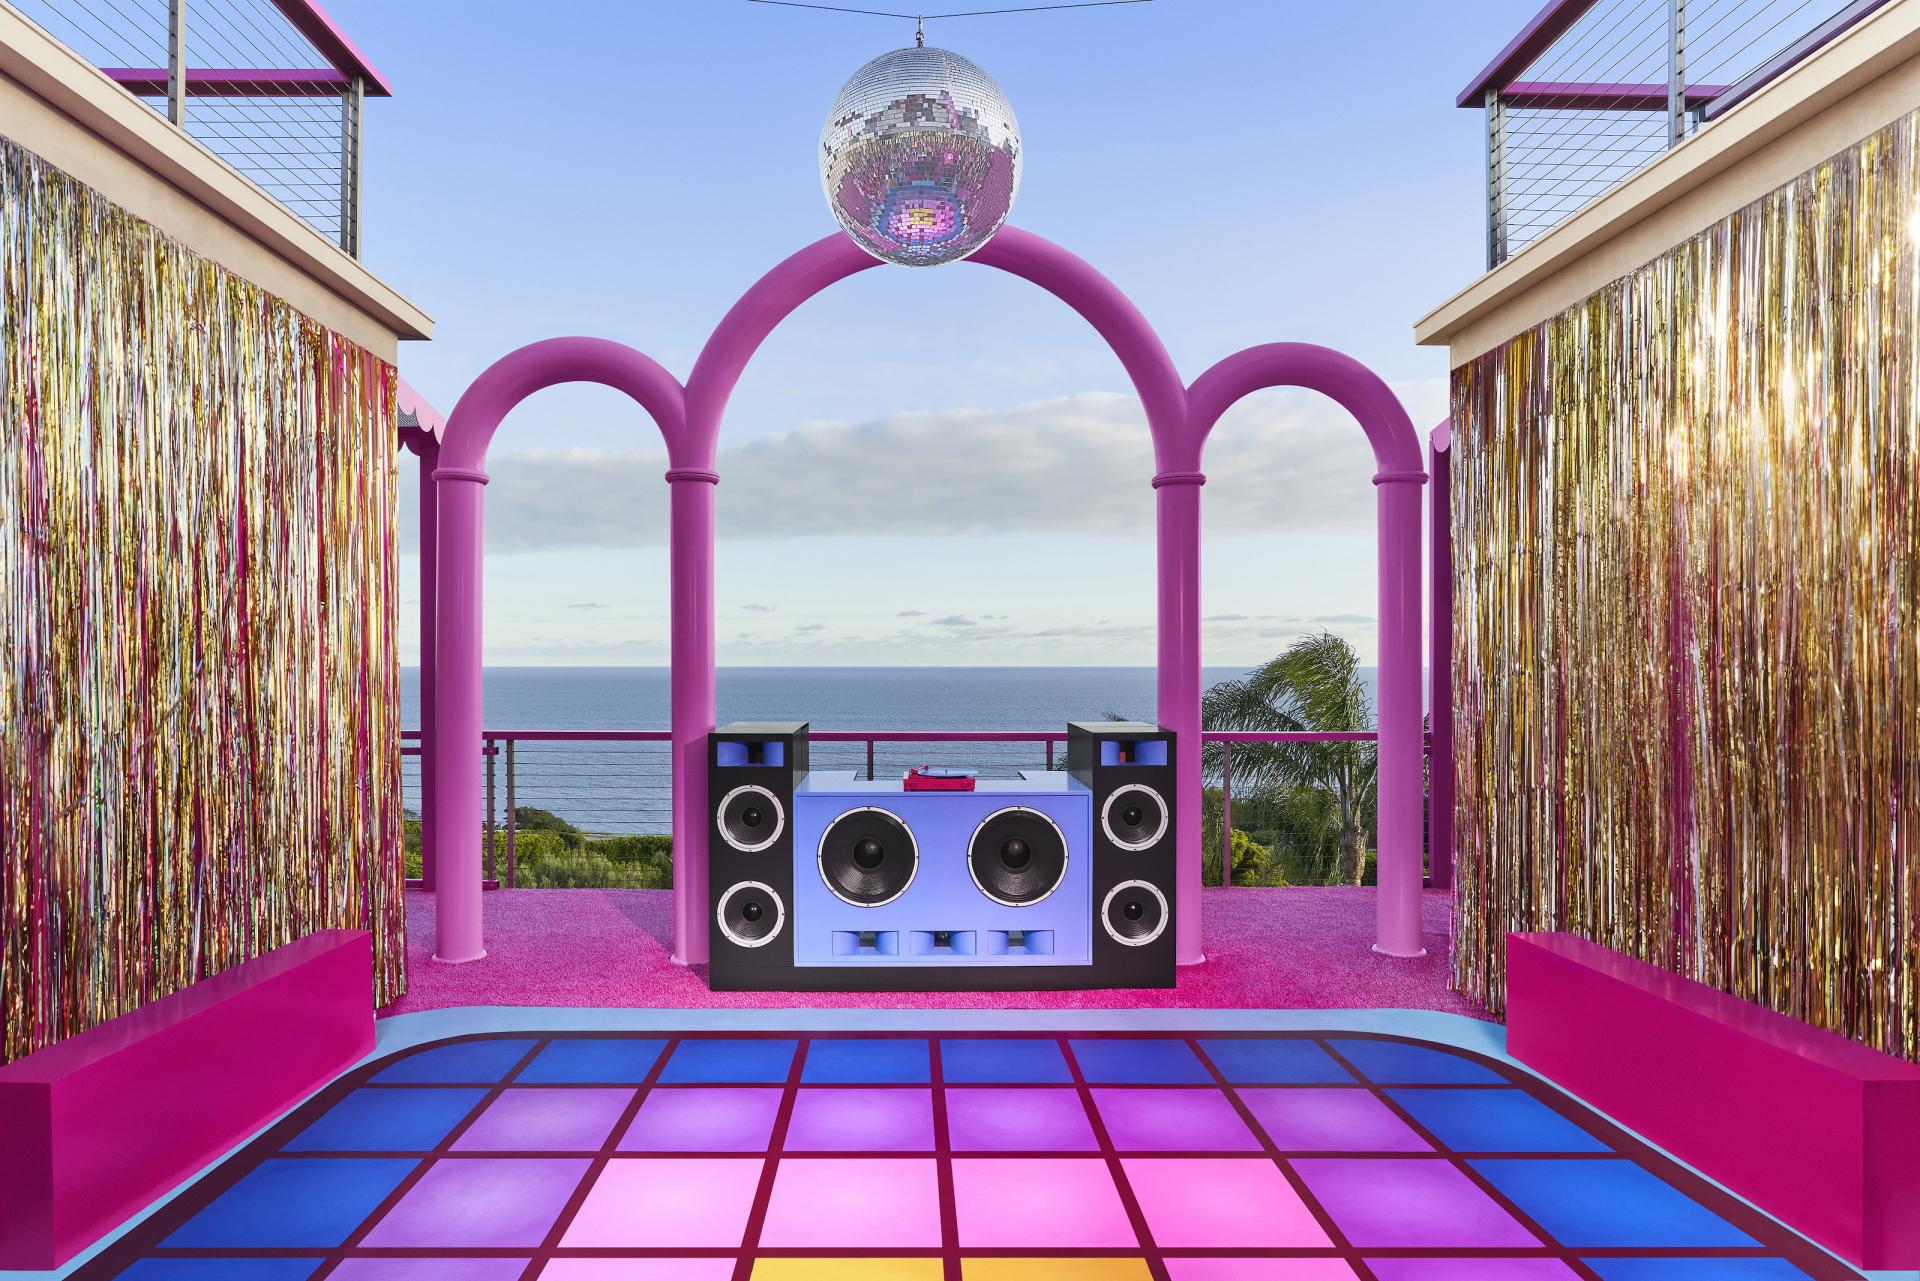 Barbie’s pink-drenched Malibu DreamHouse is hitting Airbnb again – this time, Ken is hosting